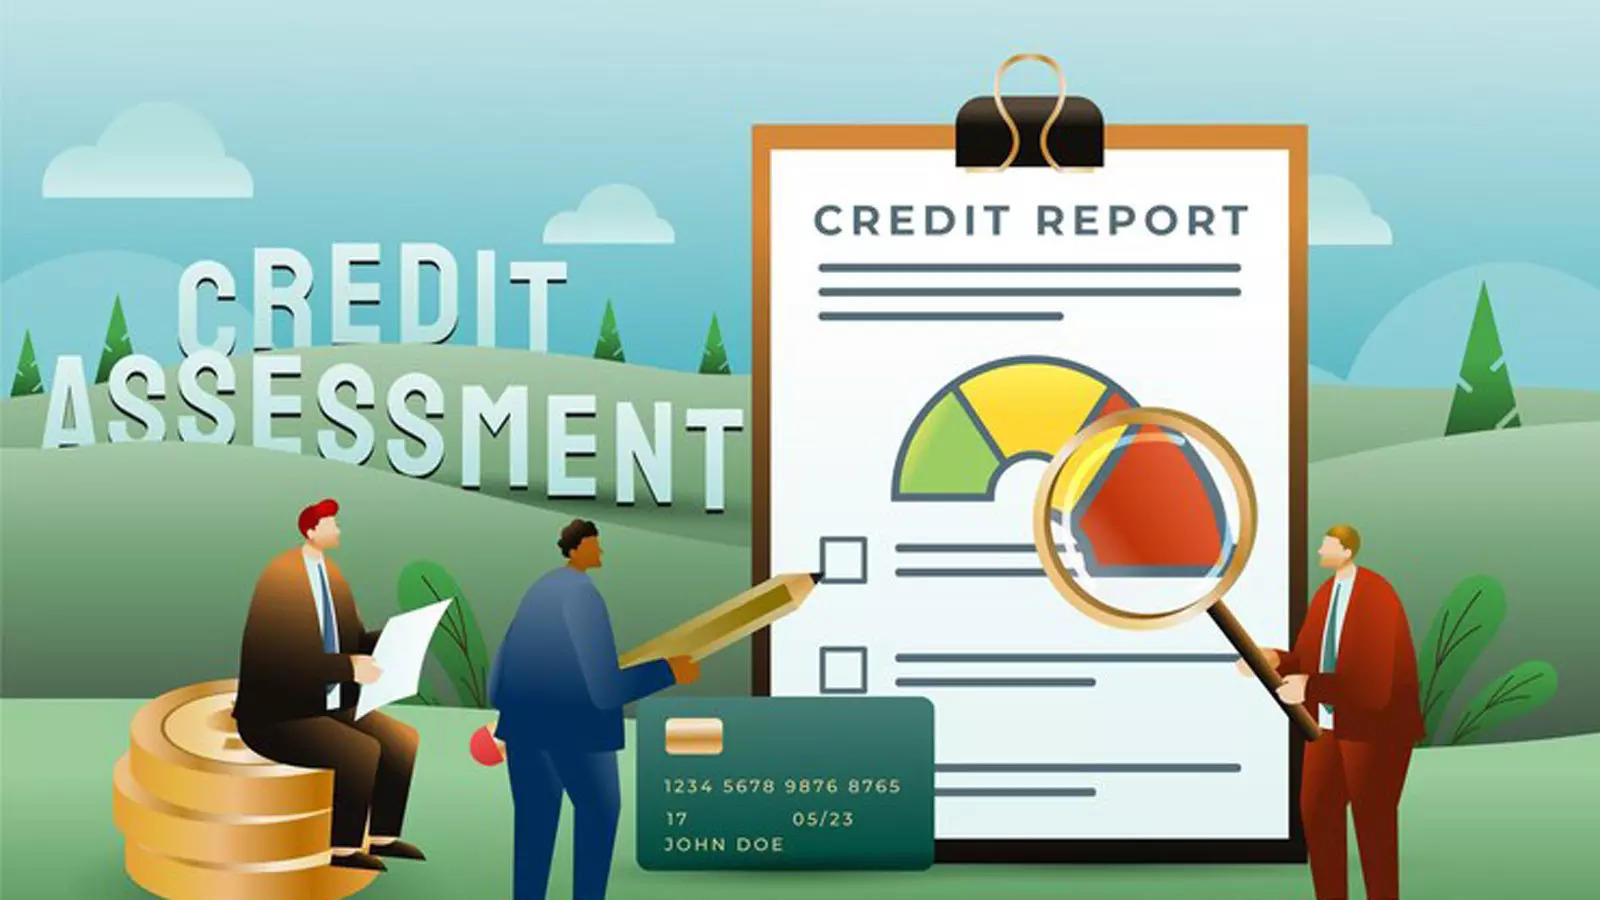 How to find and correct errors on your credit report